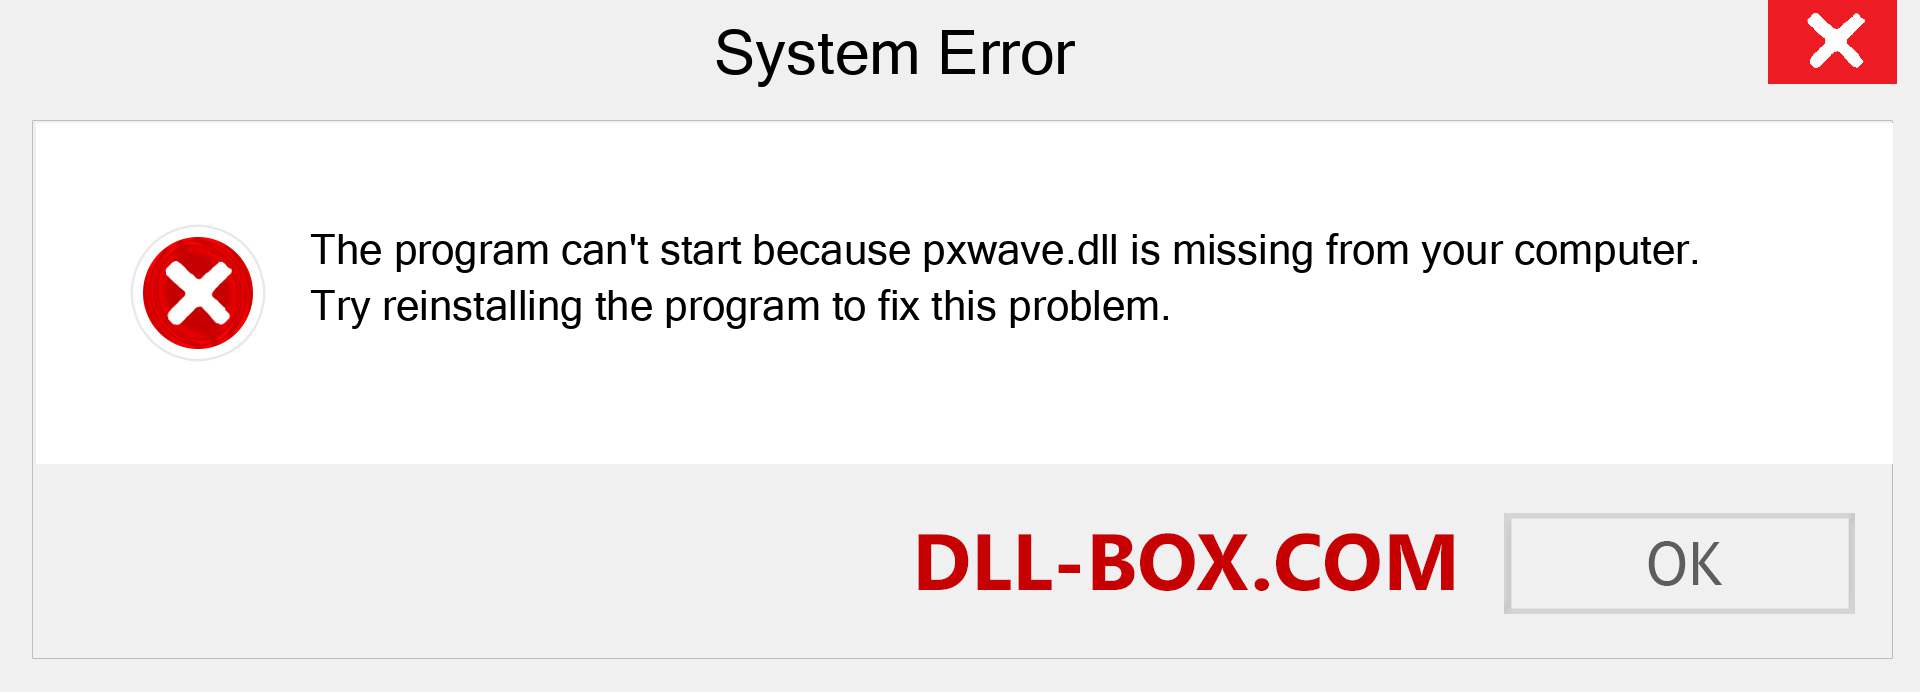  pxwave.dll file is missing?. Download for Windows 7, 8, 10 - Fix  pxwave dll Missing Error on Windows, photos, images